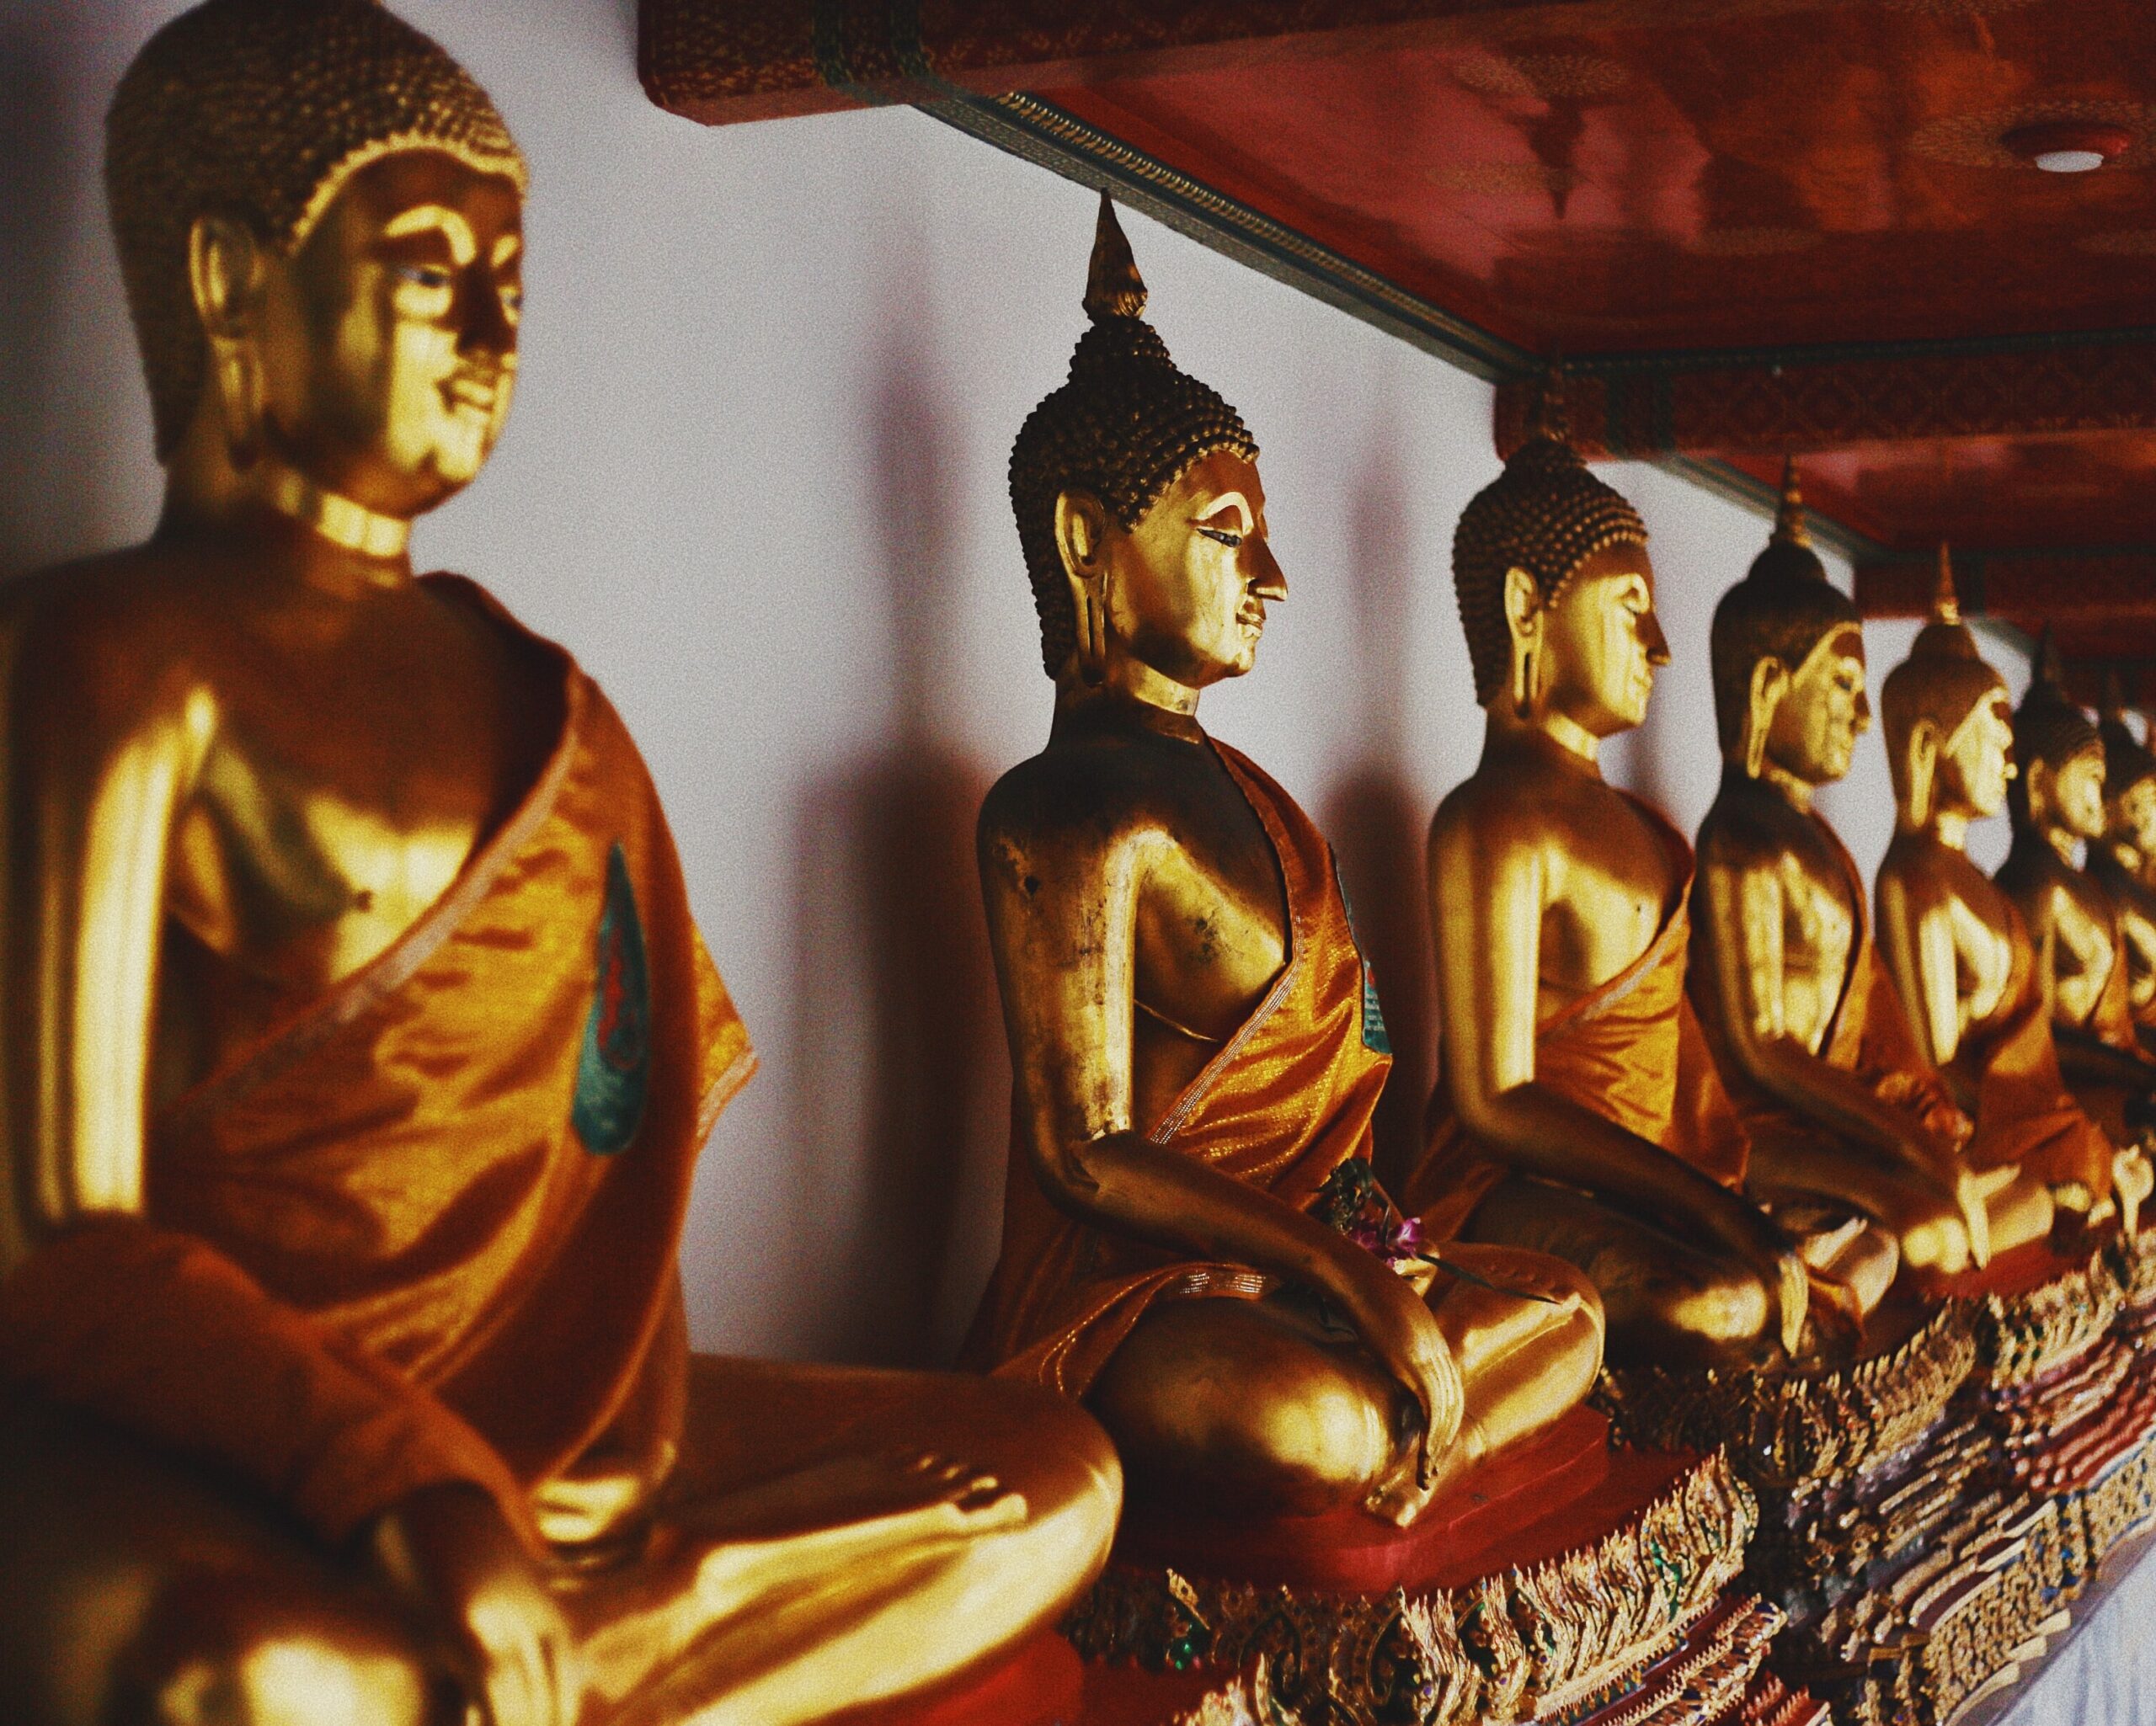 A majestic Buddha statue is shown in the picture